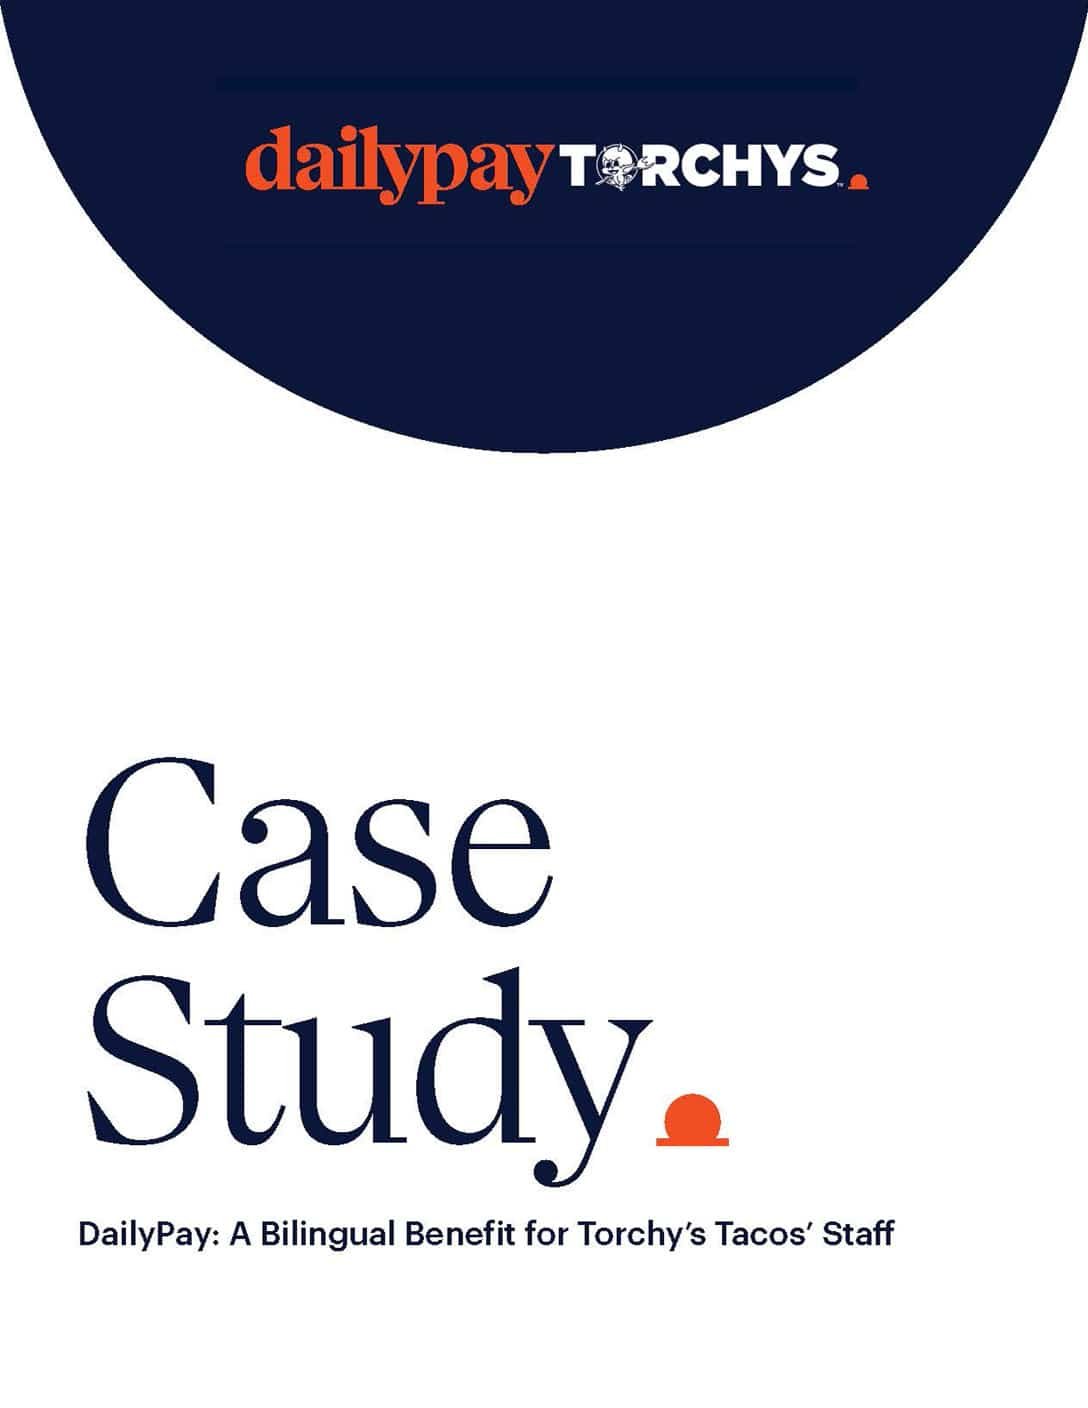 A document cover with a navy-blue circle at the top featuring the orange and white text "dailypay TORCHYS" and their logos. Below, text reads "Case Study" in large navy-blue letters with an orange icon, and smaller text says "DailyPay: A Bilingual Benefit for Torchy's Tacos' Staff" against a white background.